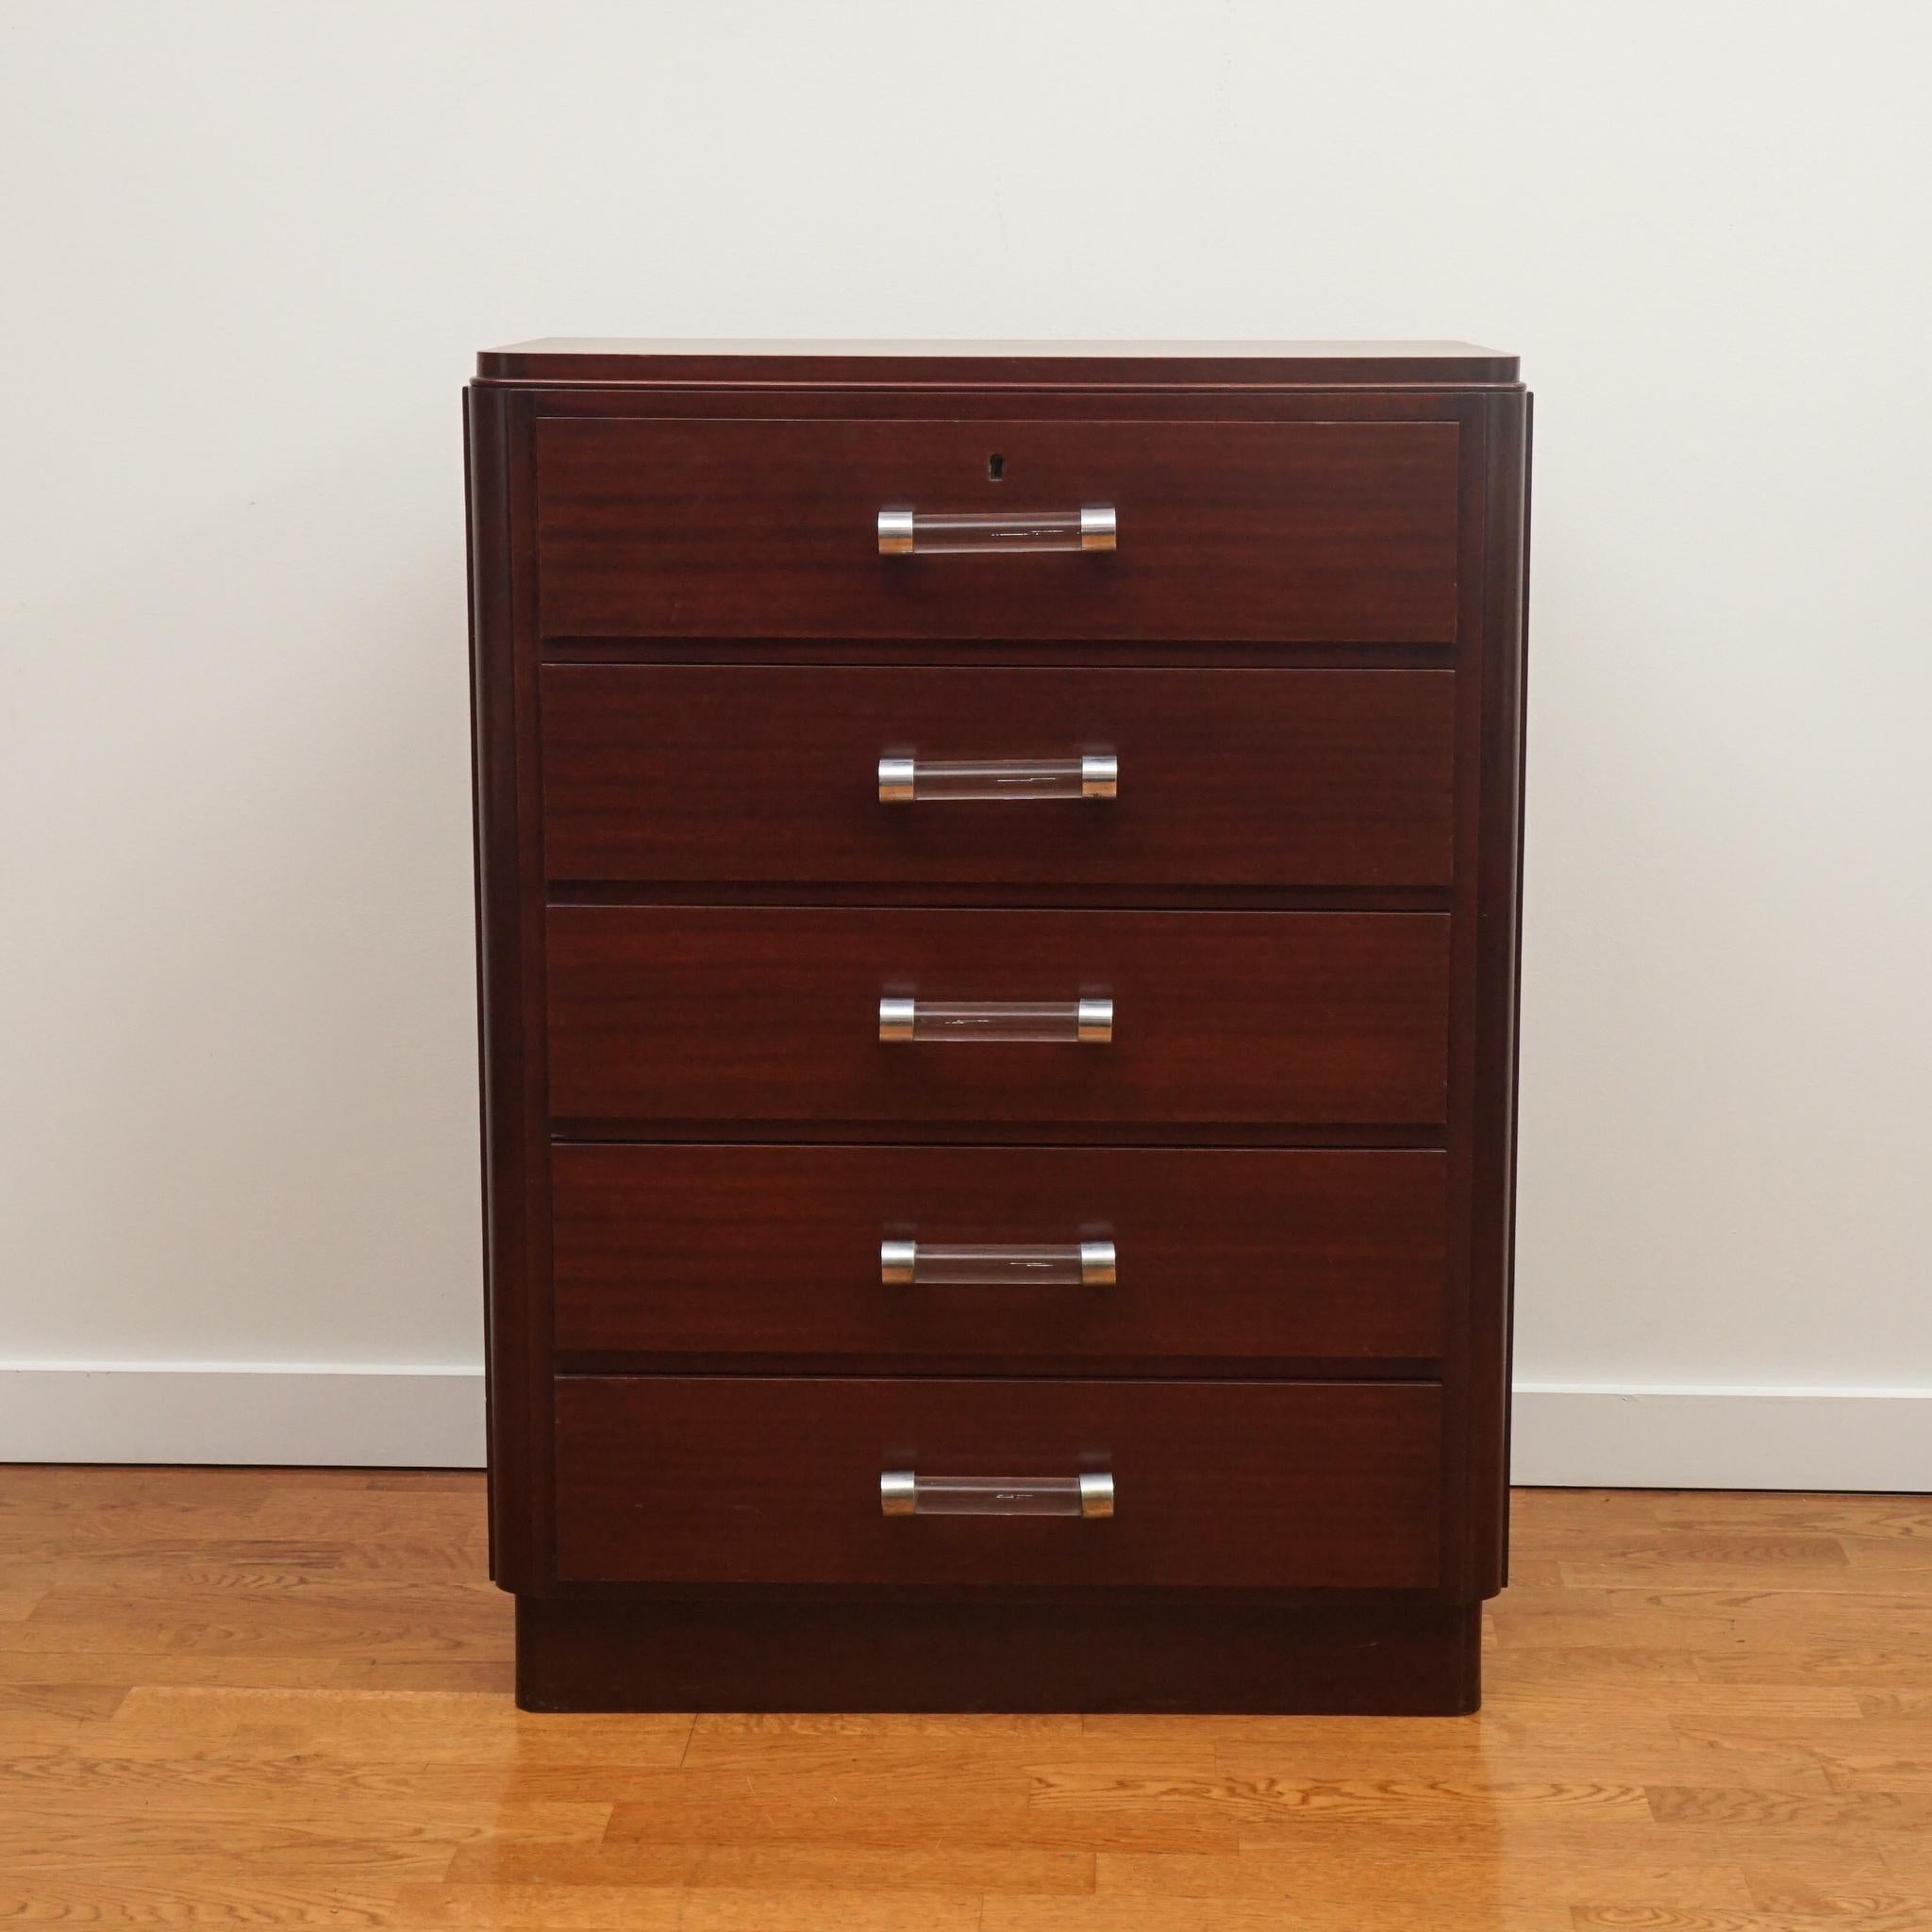 This mahogany office cabinet was designed by French deco master Louis Neiss and made in 1935. In addition to its beautiful restored mahogany finish, the cabinet features the original glass and metal drawer pulls. Very good condition given its age.